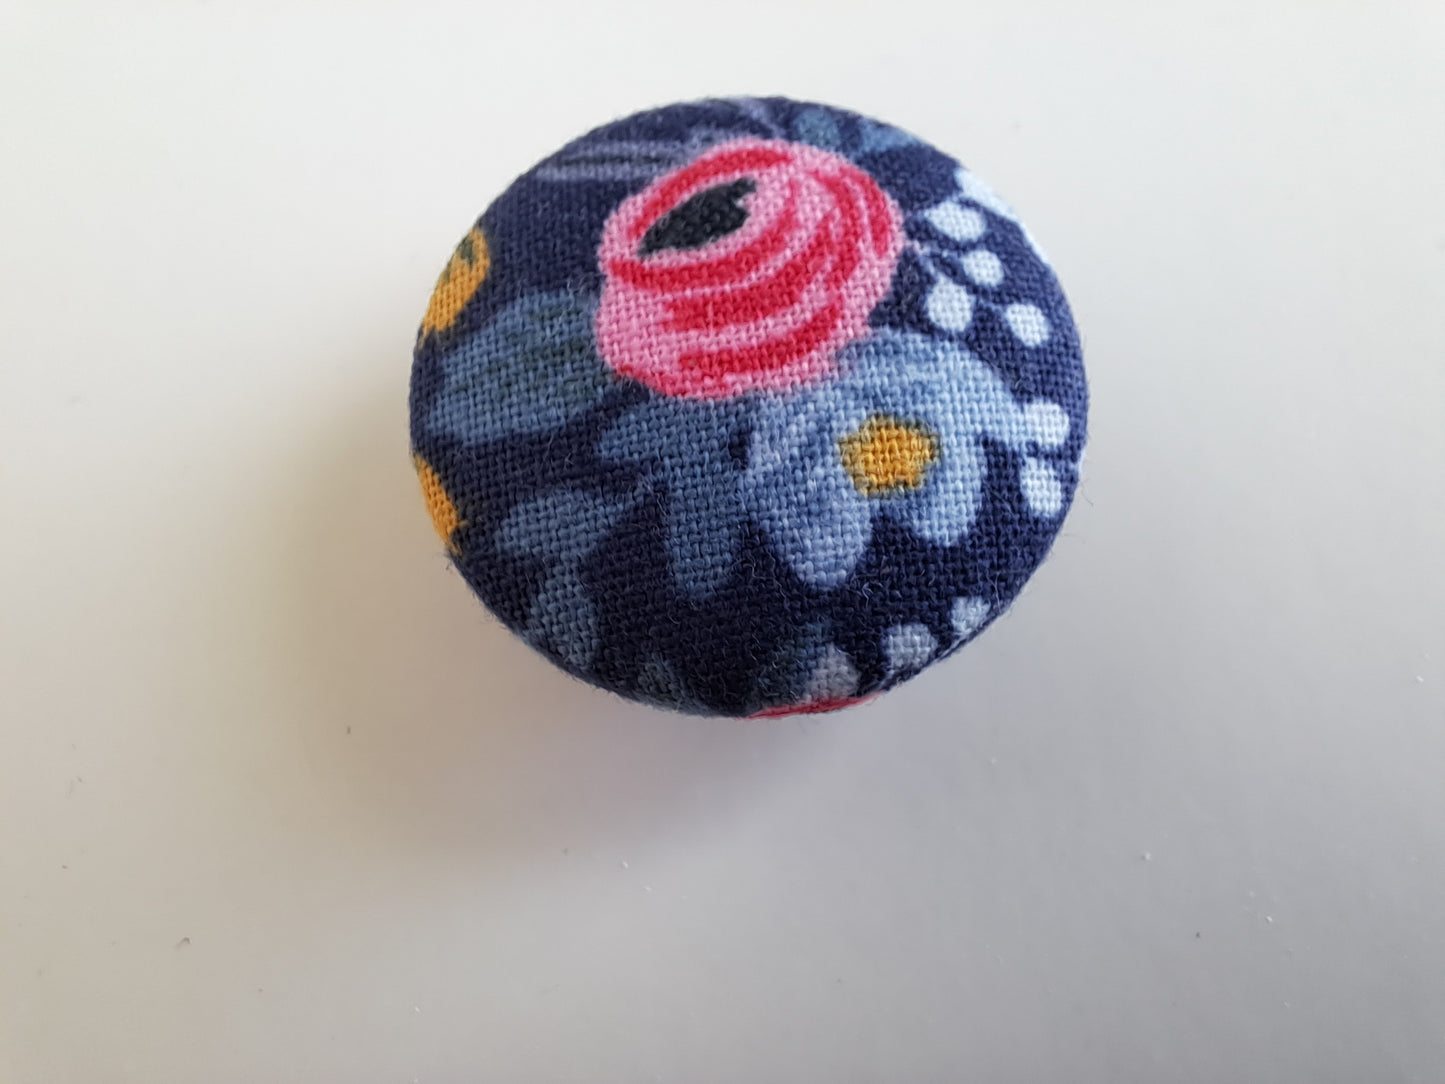 Floral Magnetic Needle Minders